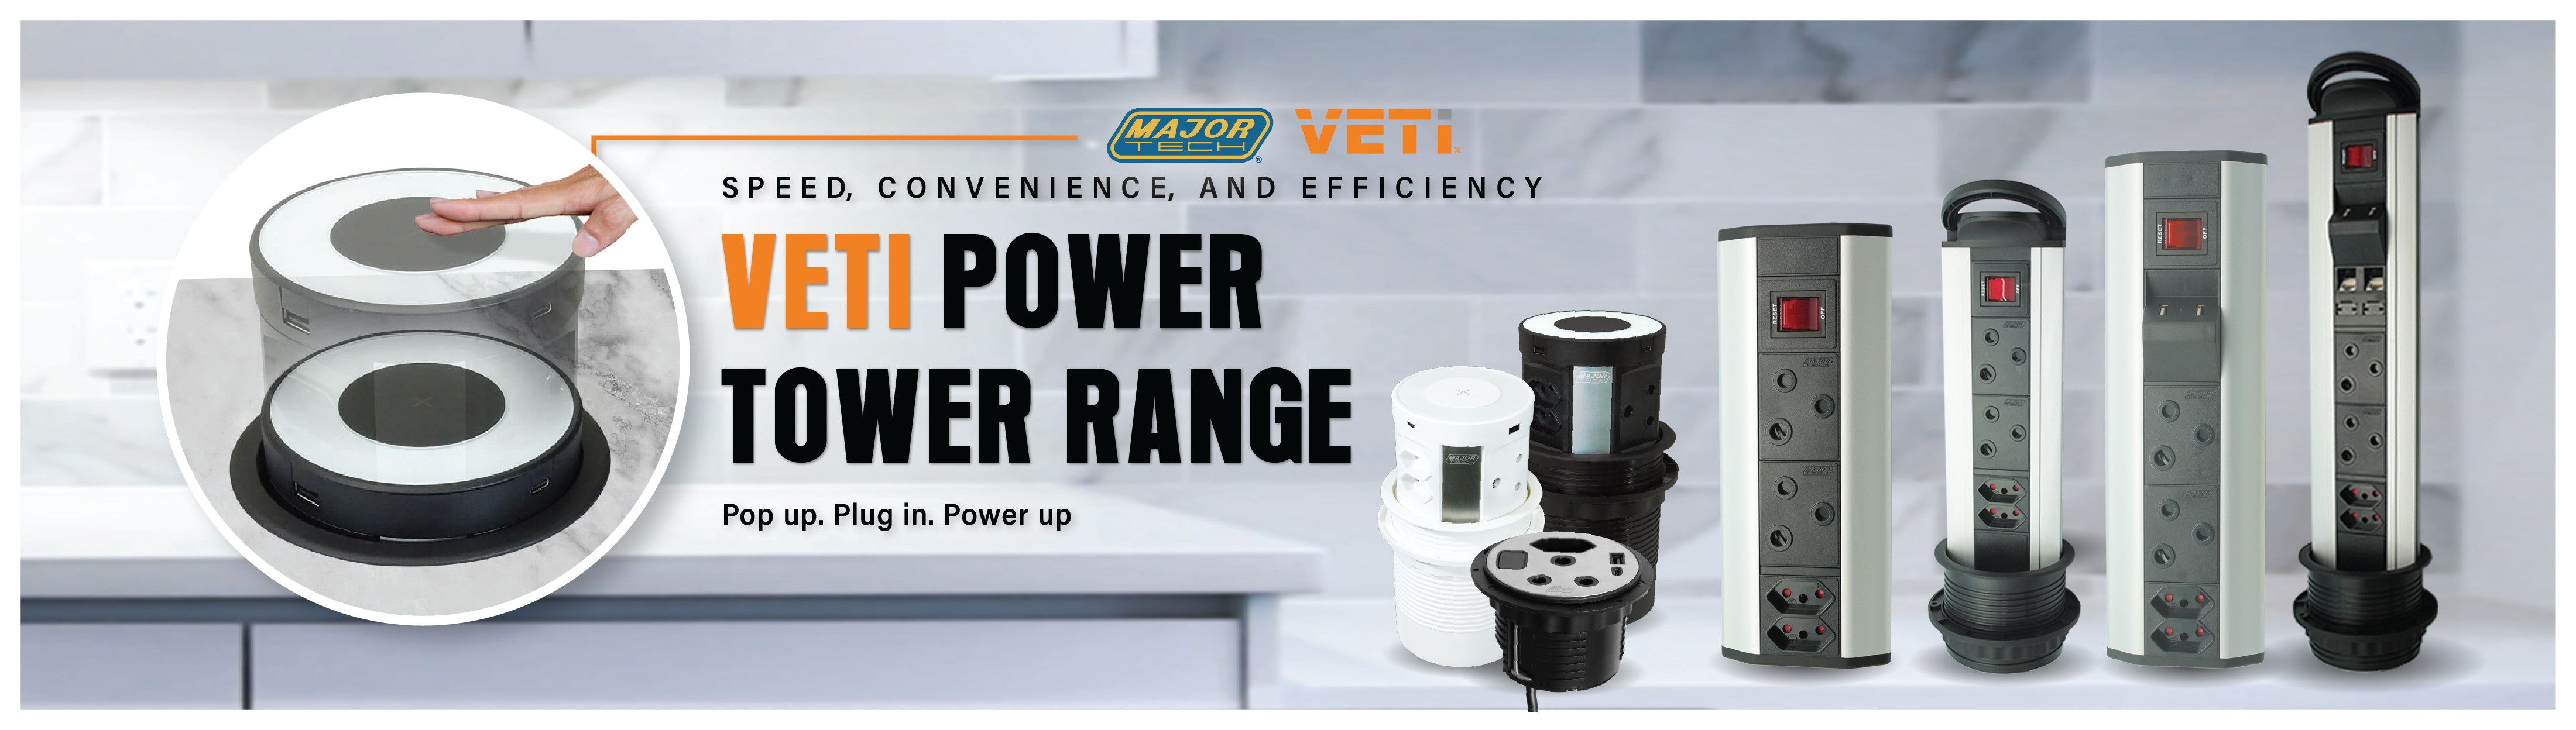 VETI Power towers: Speed, convenience, and efficiency